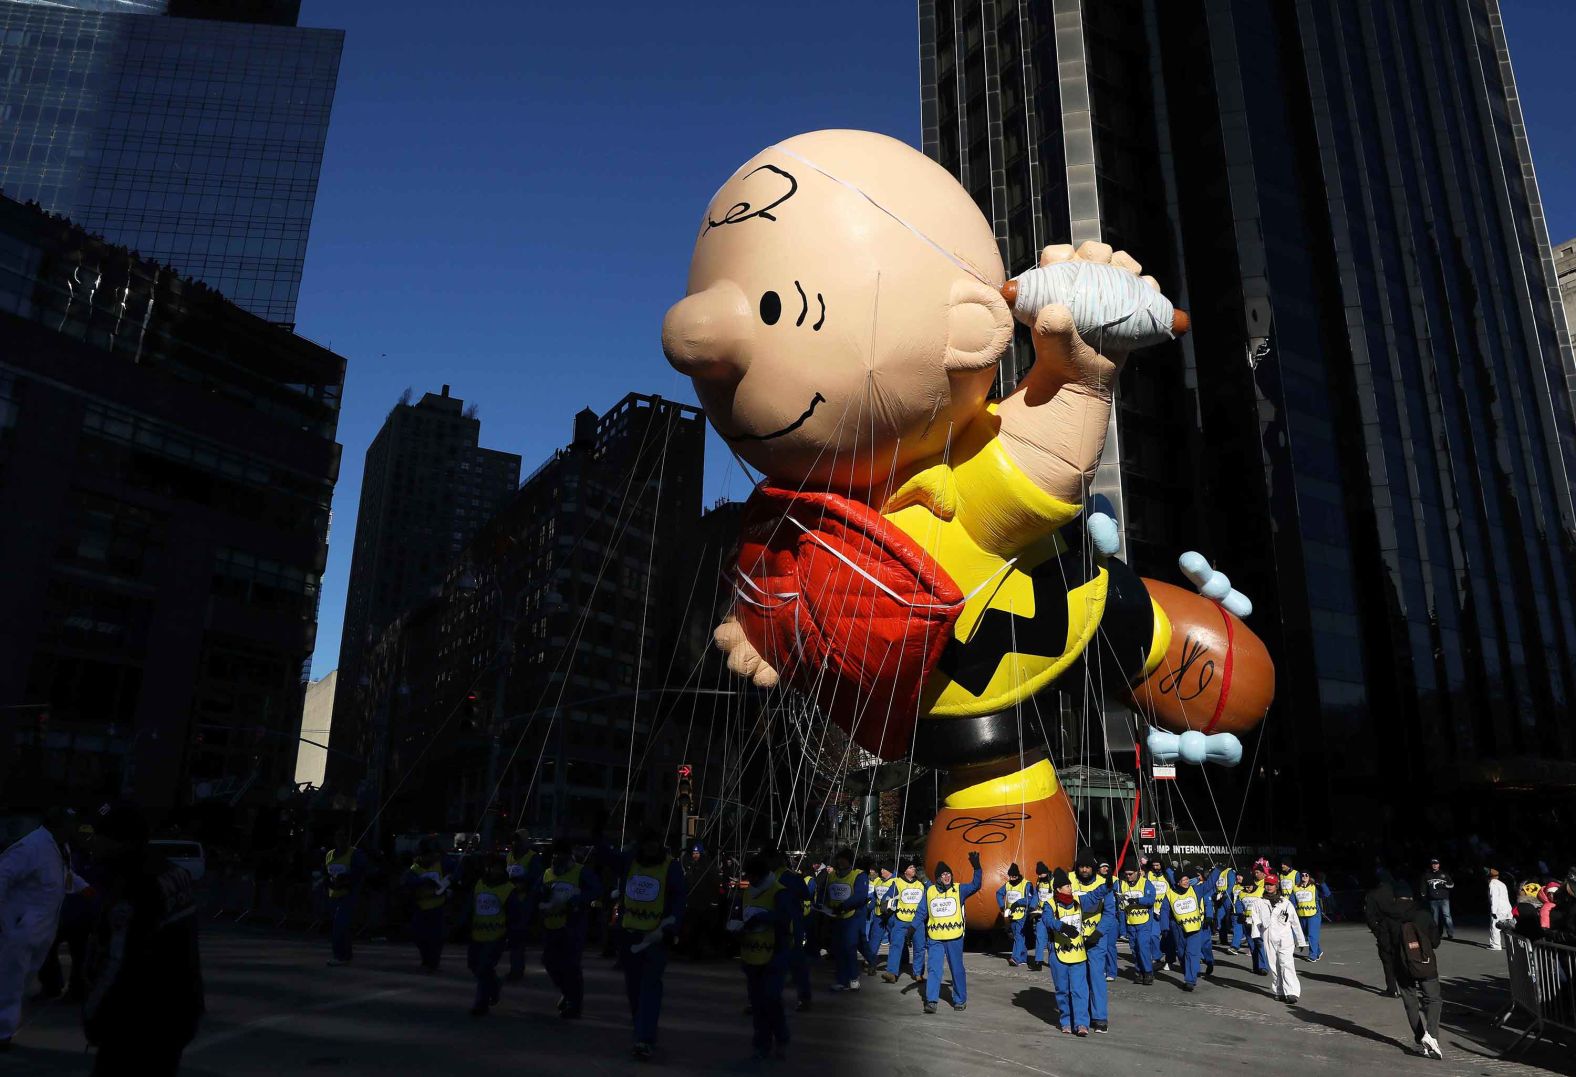 A Charlie Brown float glides past skyscrapers.